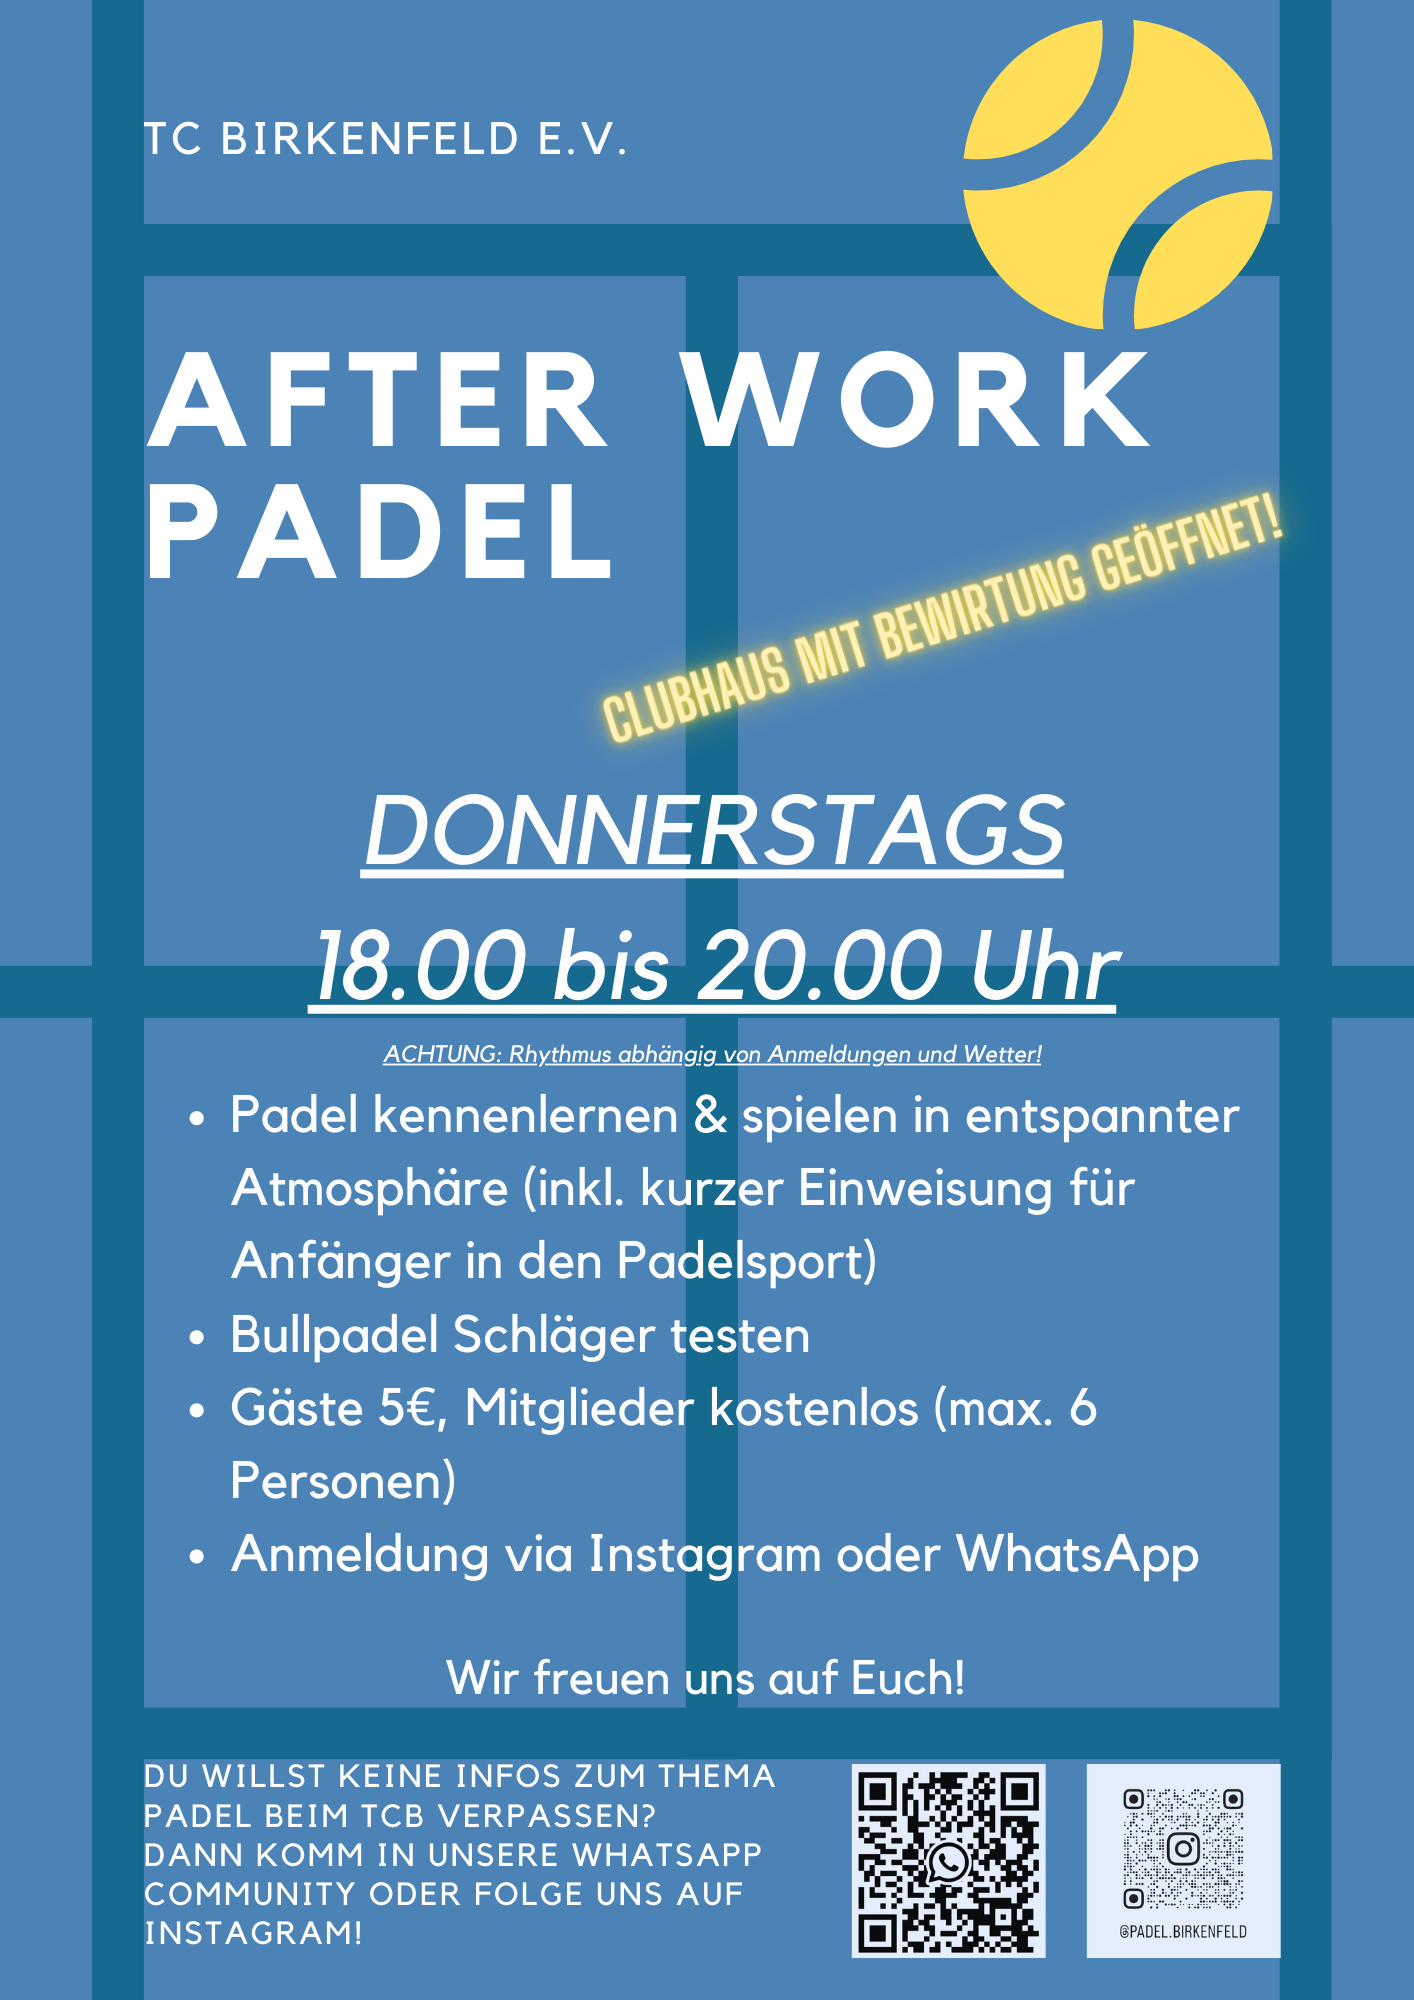 AFTER WORK PADEL DONNERSTAGS